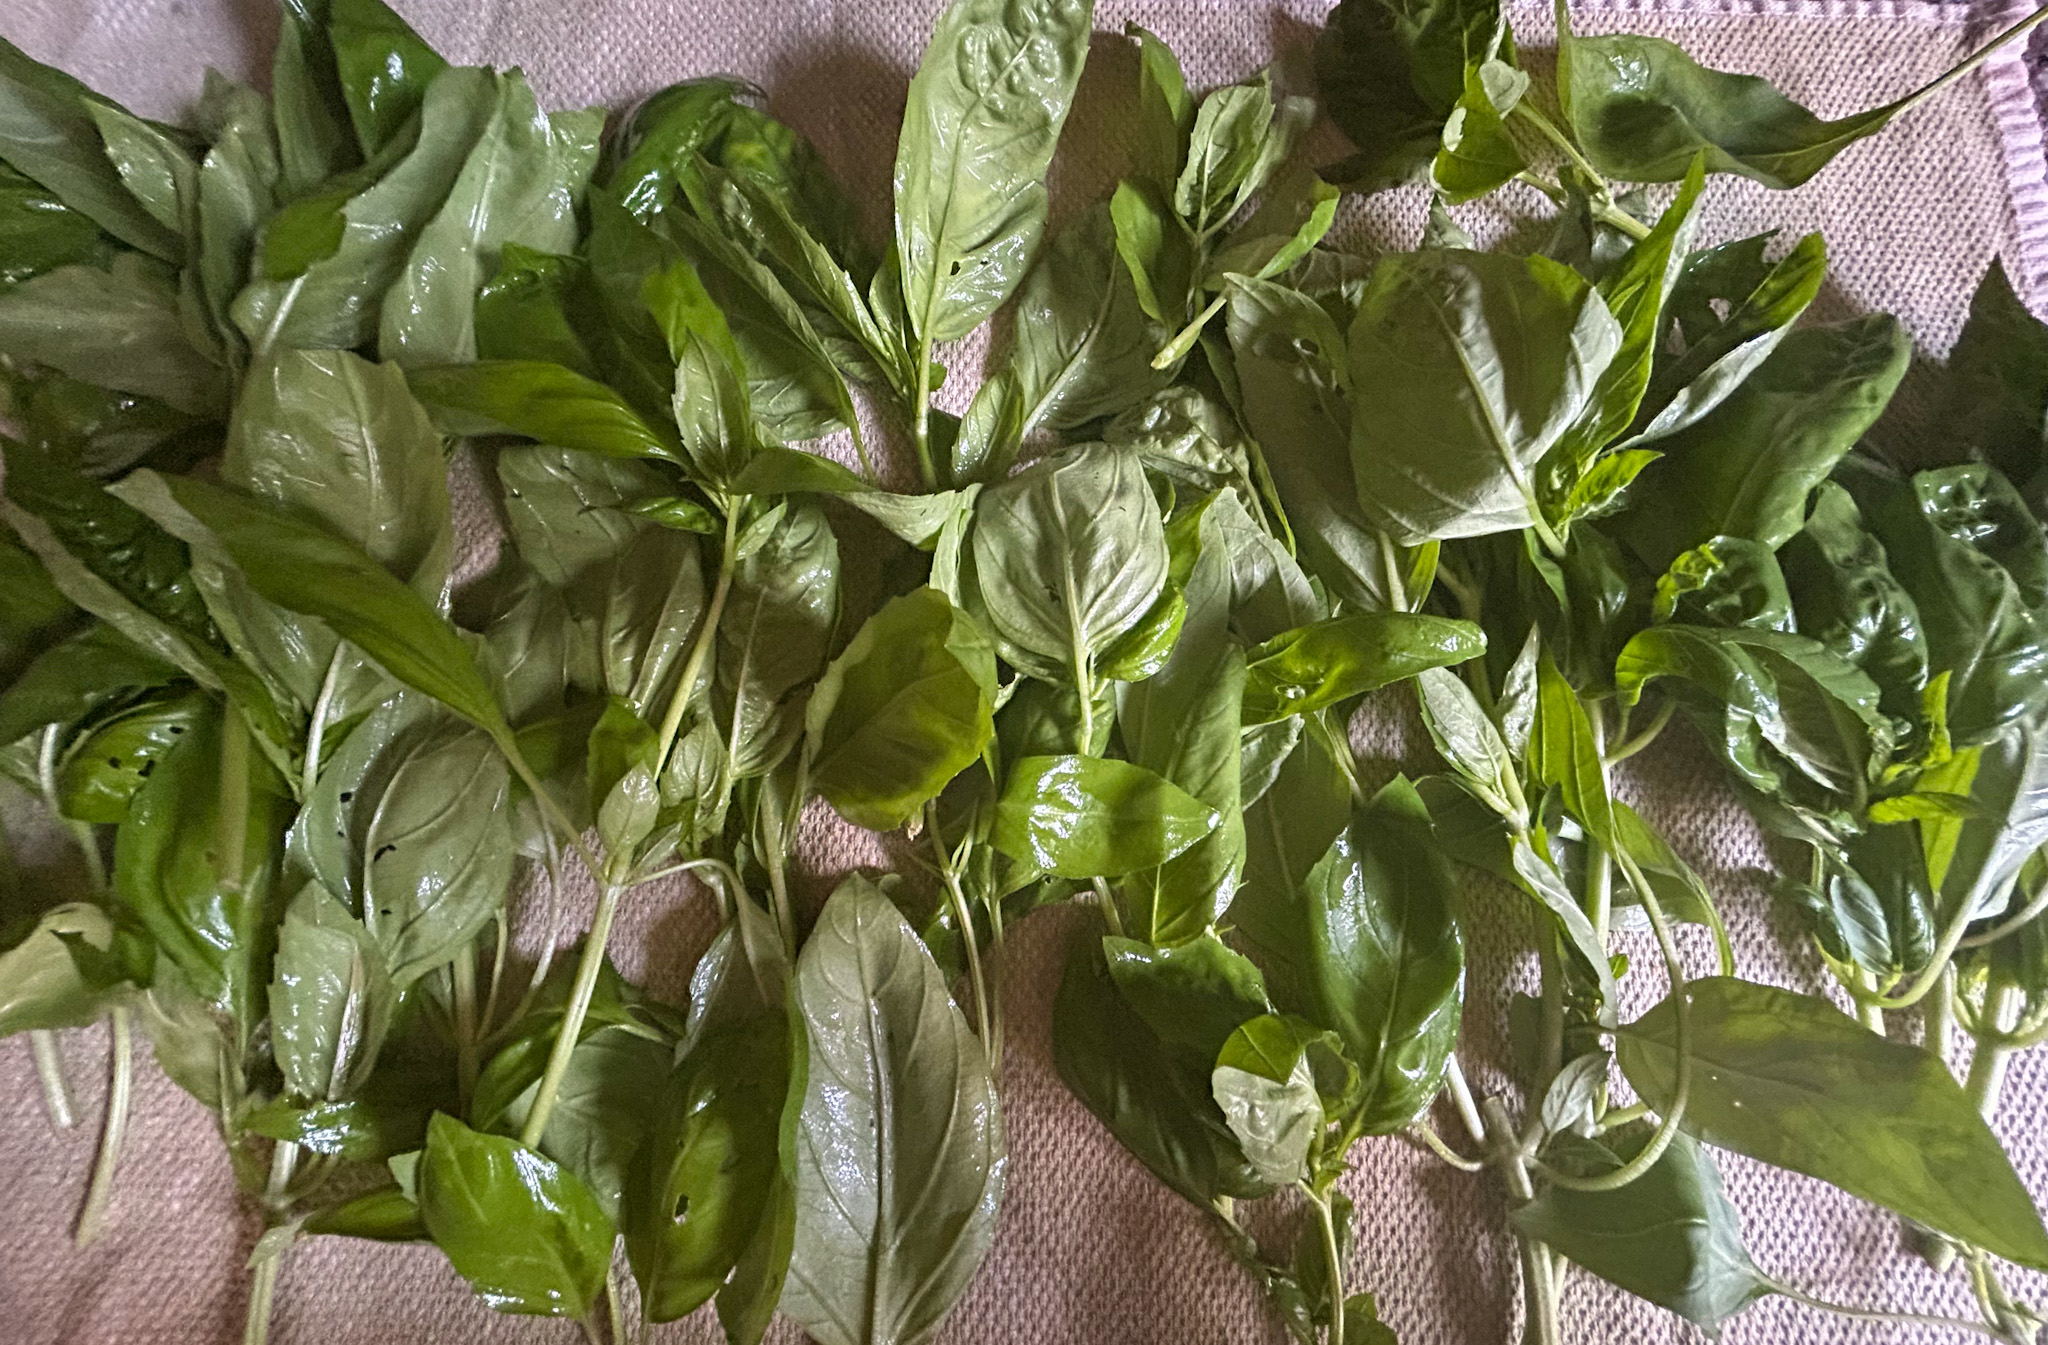 Stems of basil laying out on towel on counter